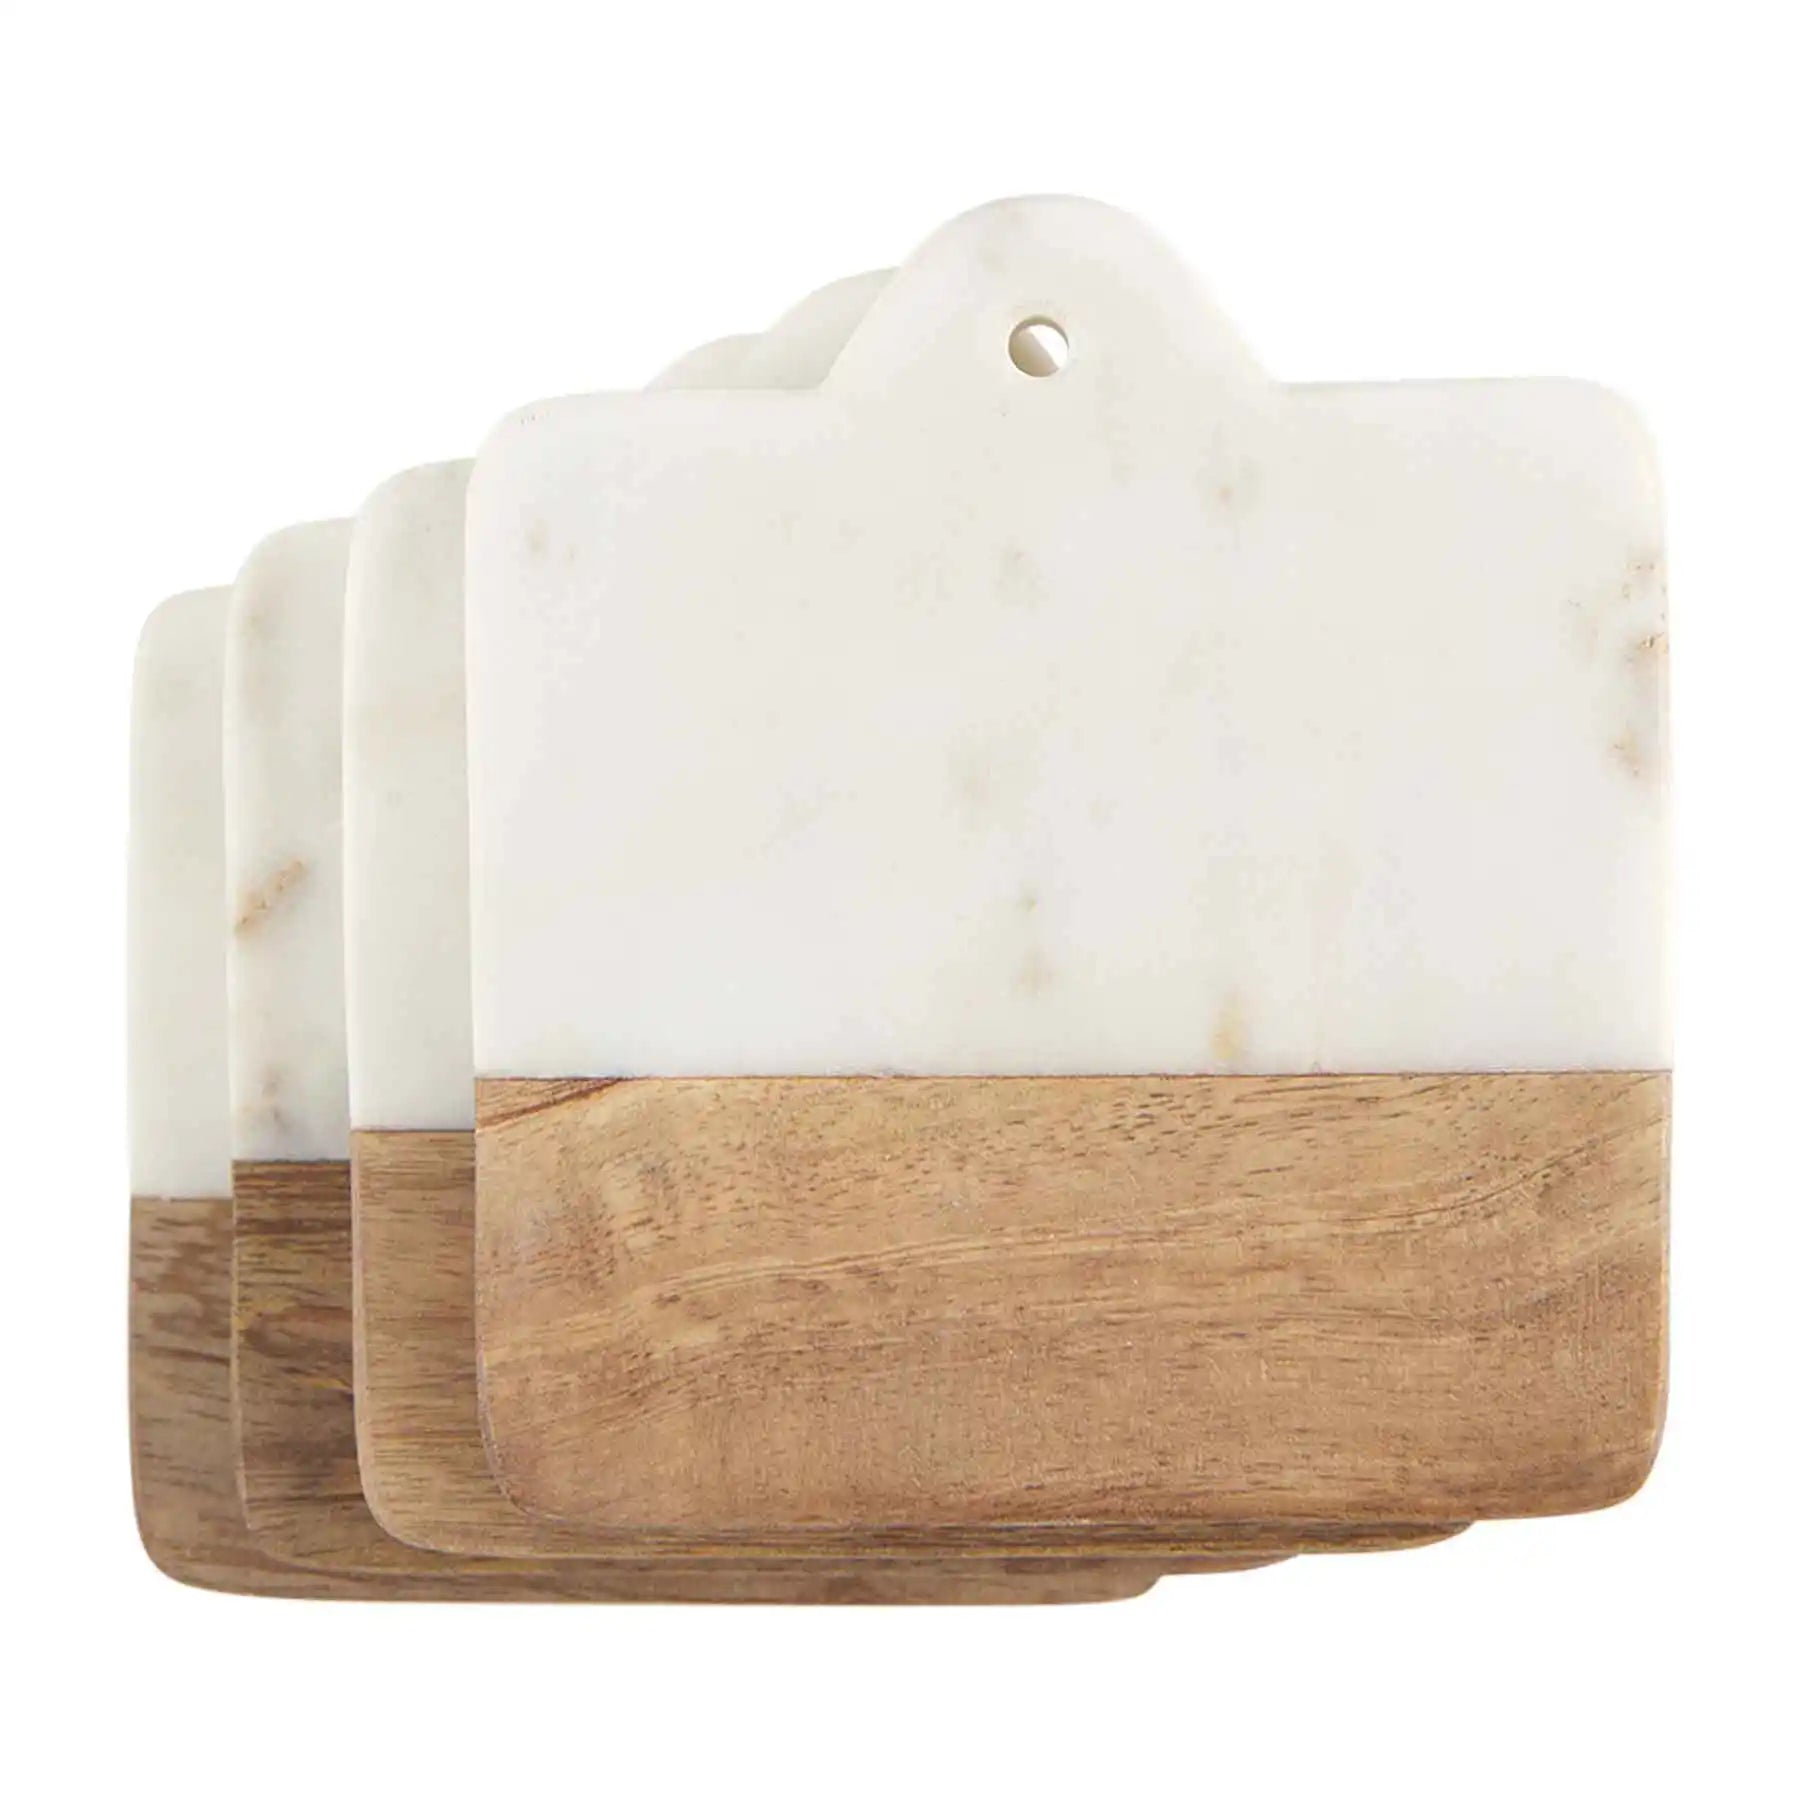 Mudpie Marble and Wood Square Coaster Set